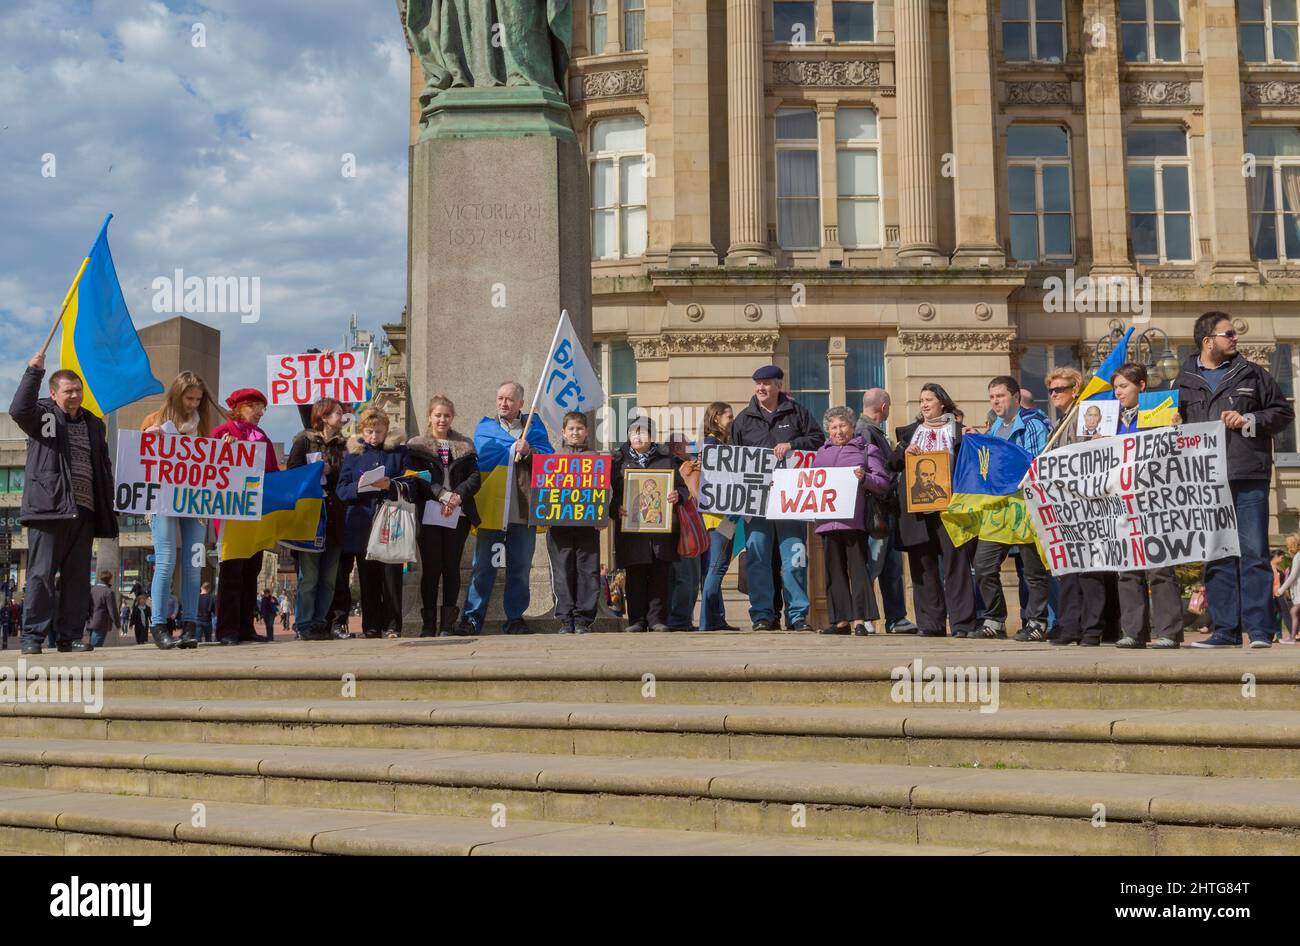 Demonstrators carrying the Ukrainian flag meet in Birmingham city centre to protest the invasion and annexation of Crimea by the Russian Federation. Stock Photo